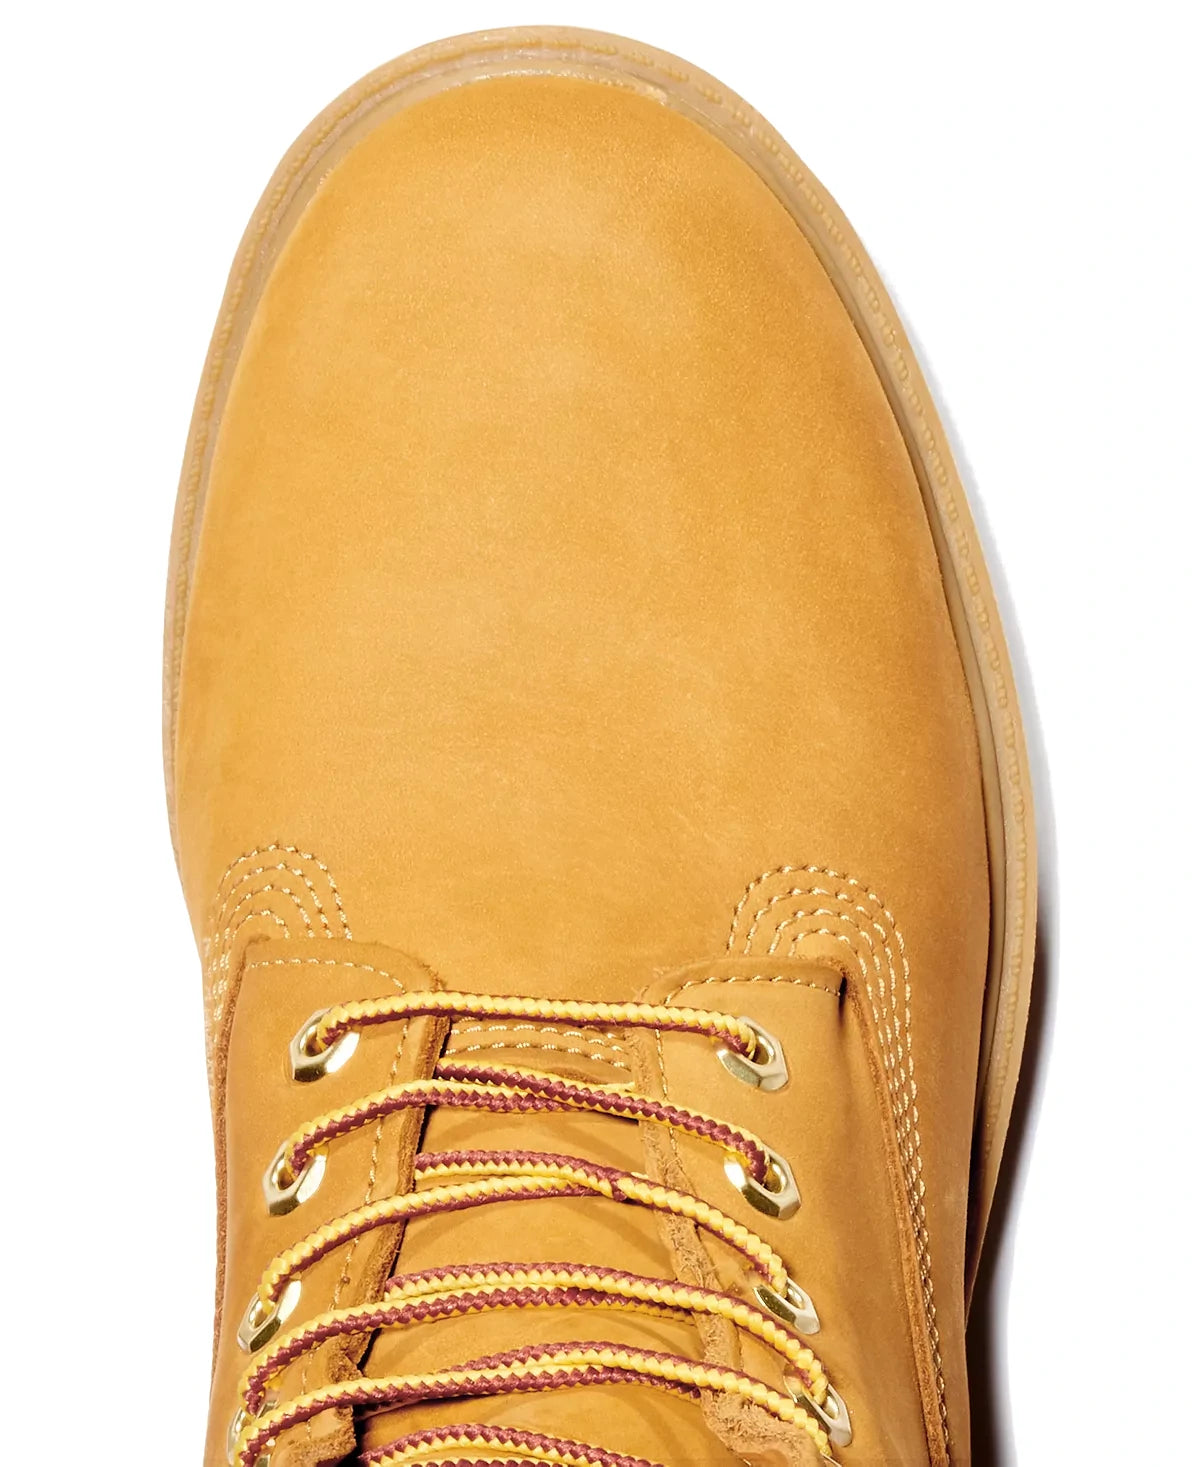 close view of top of shoe Timberland Men's 6-Inch Basic Waterproof Boots - Wheat